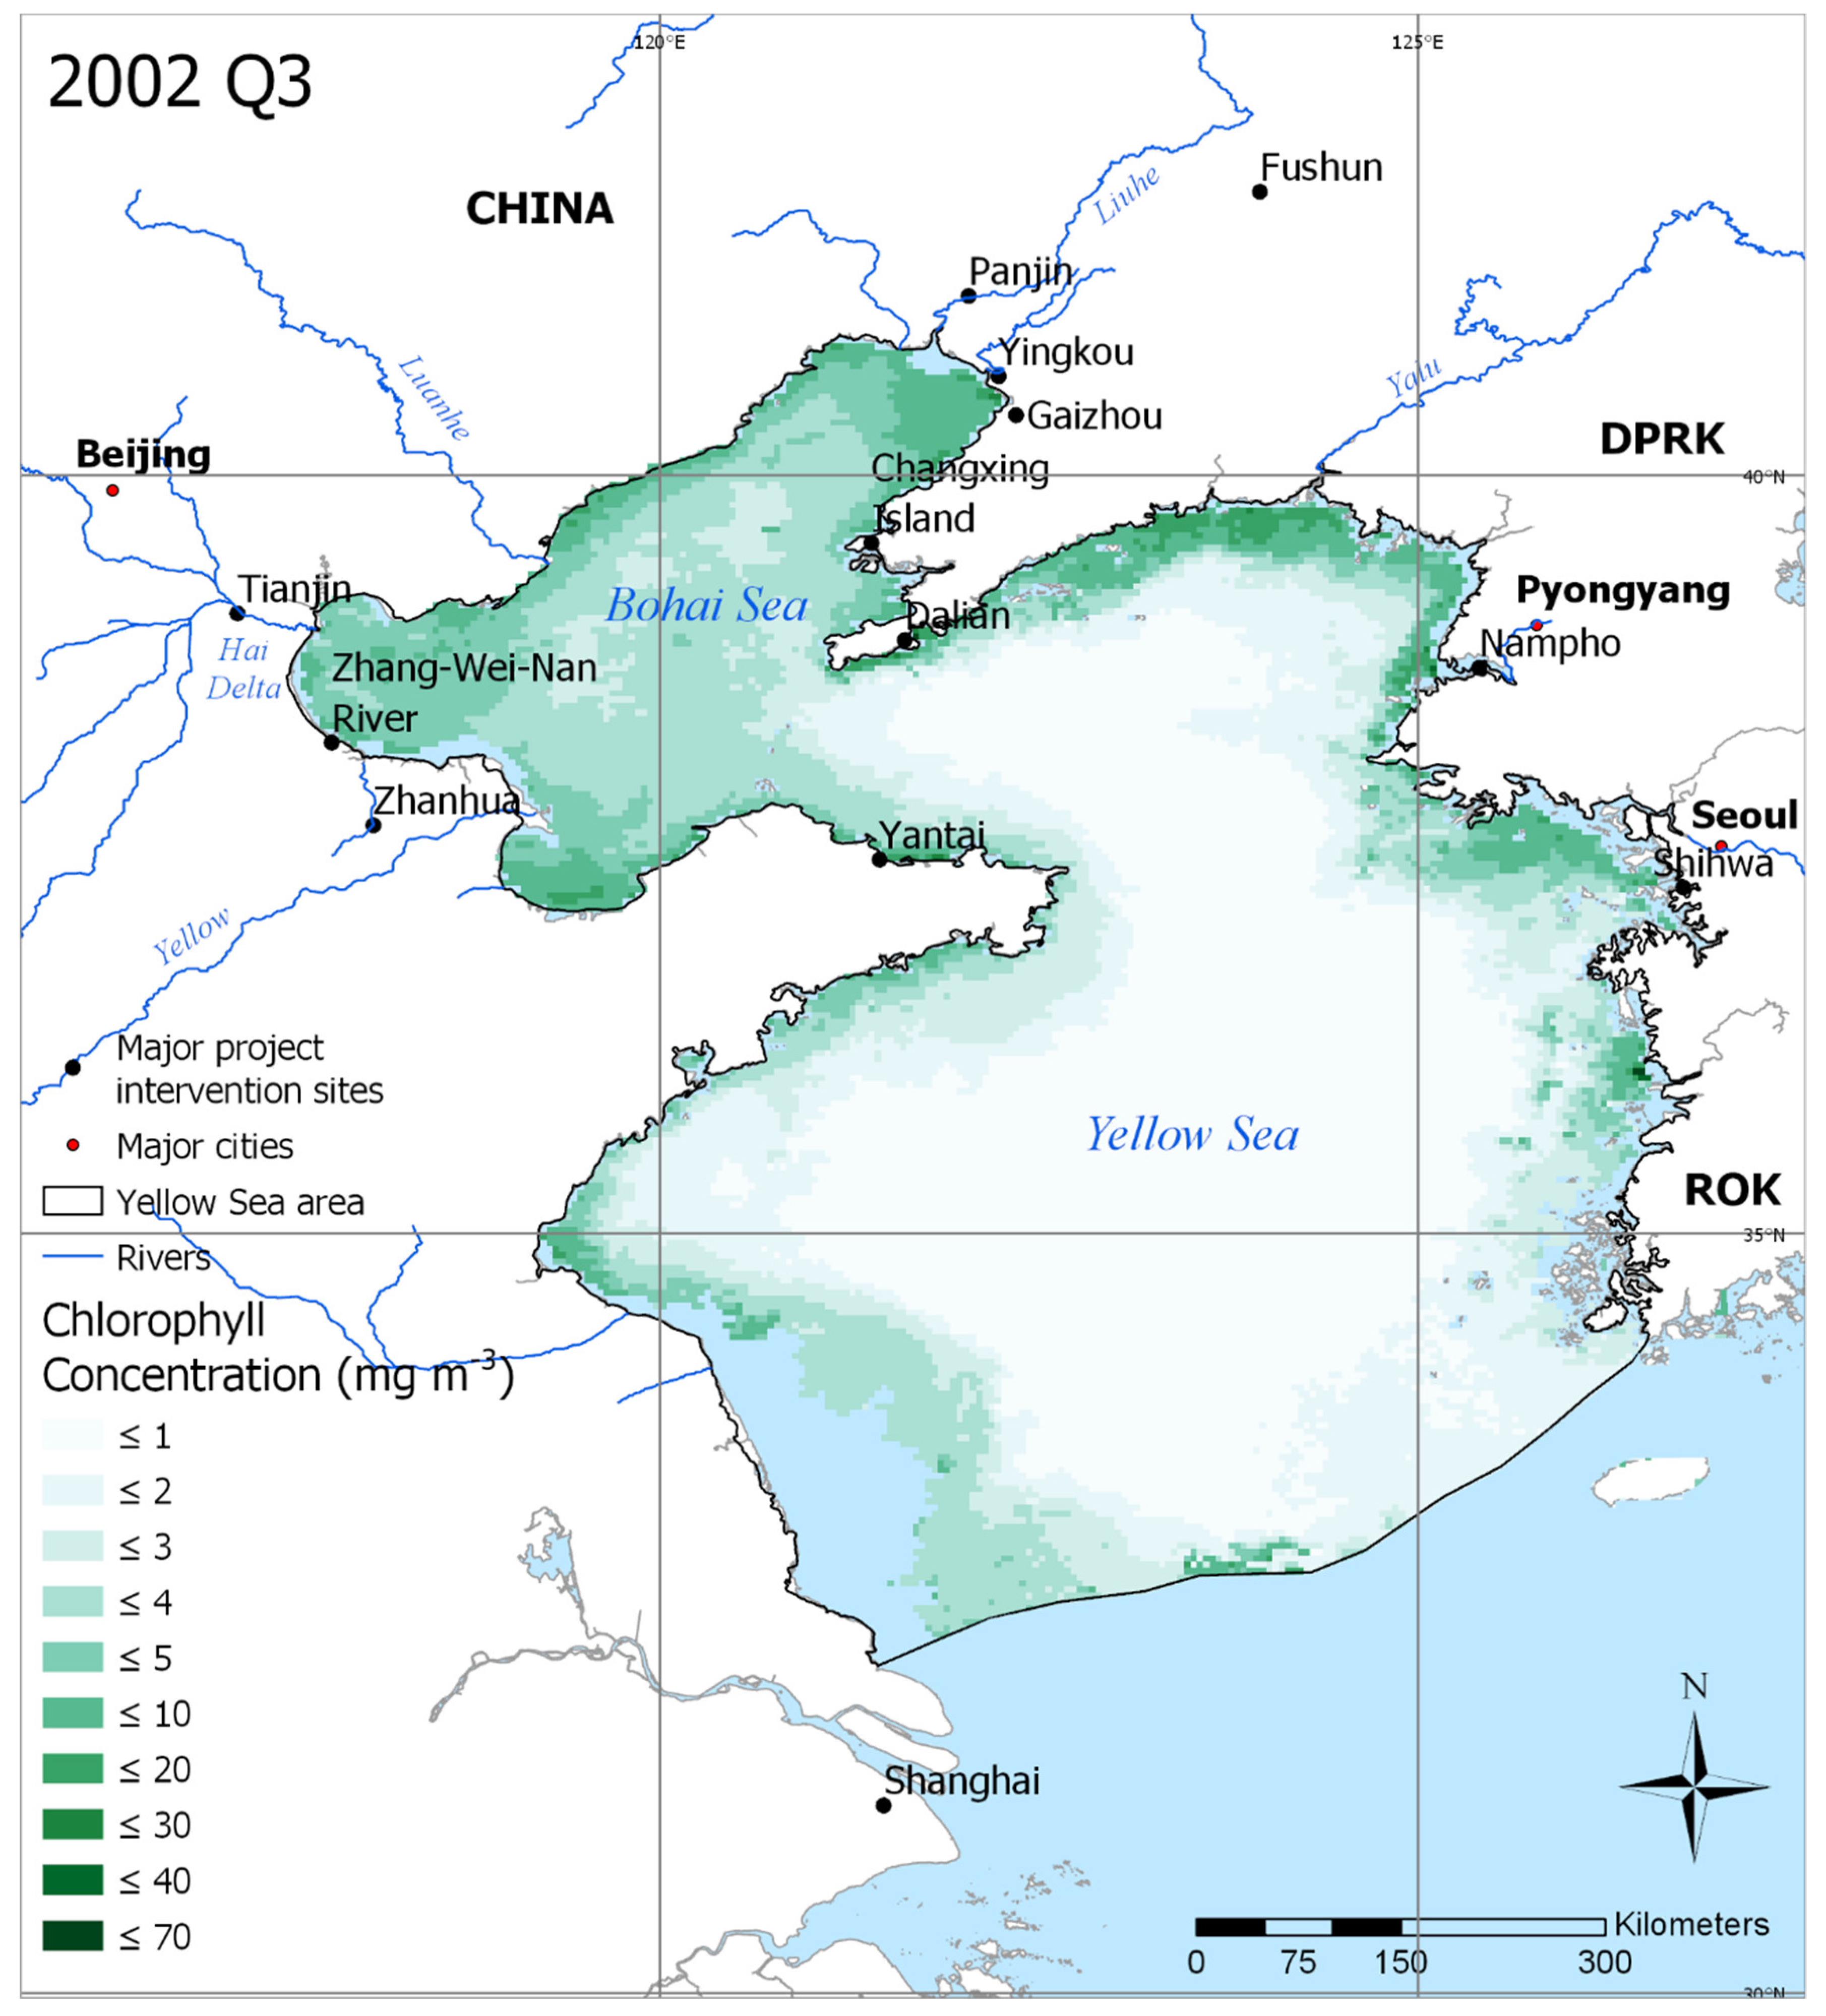 Sustainability Free Full-text The Use Of Remote Sensing Analysis For Evaluating The Impact Of Development Projects In The Yellow Sea Large Marine Ecosystem Html